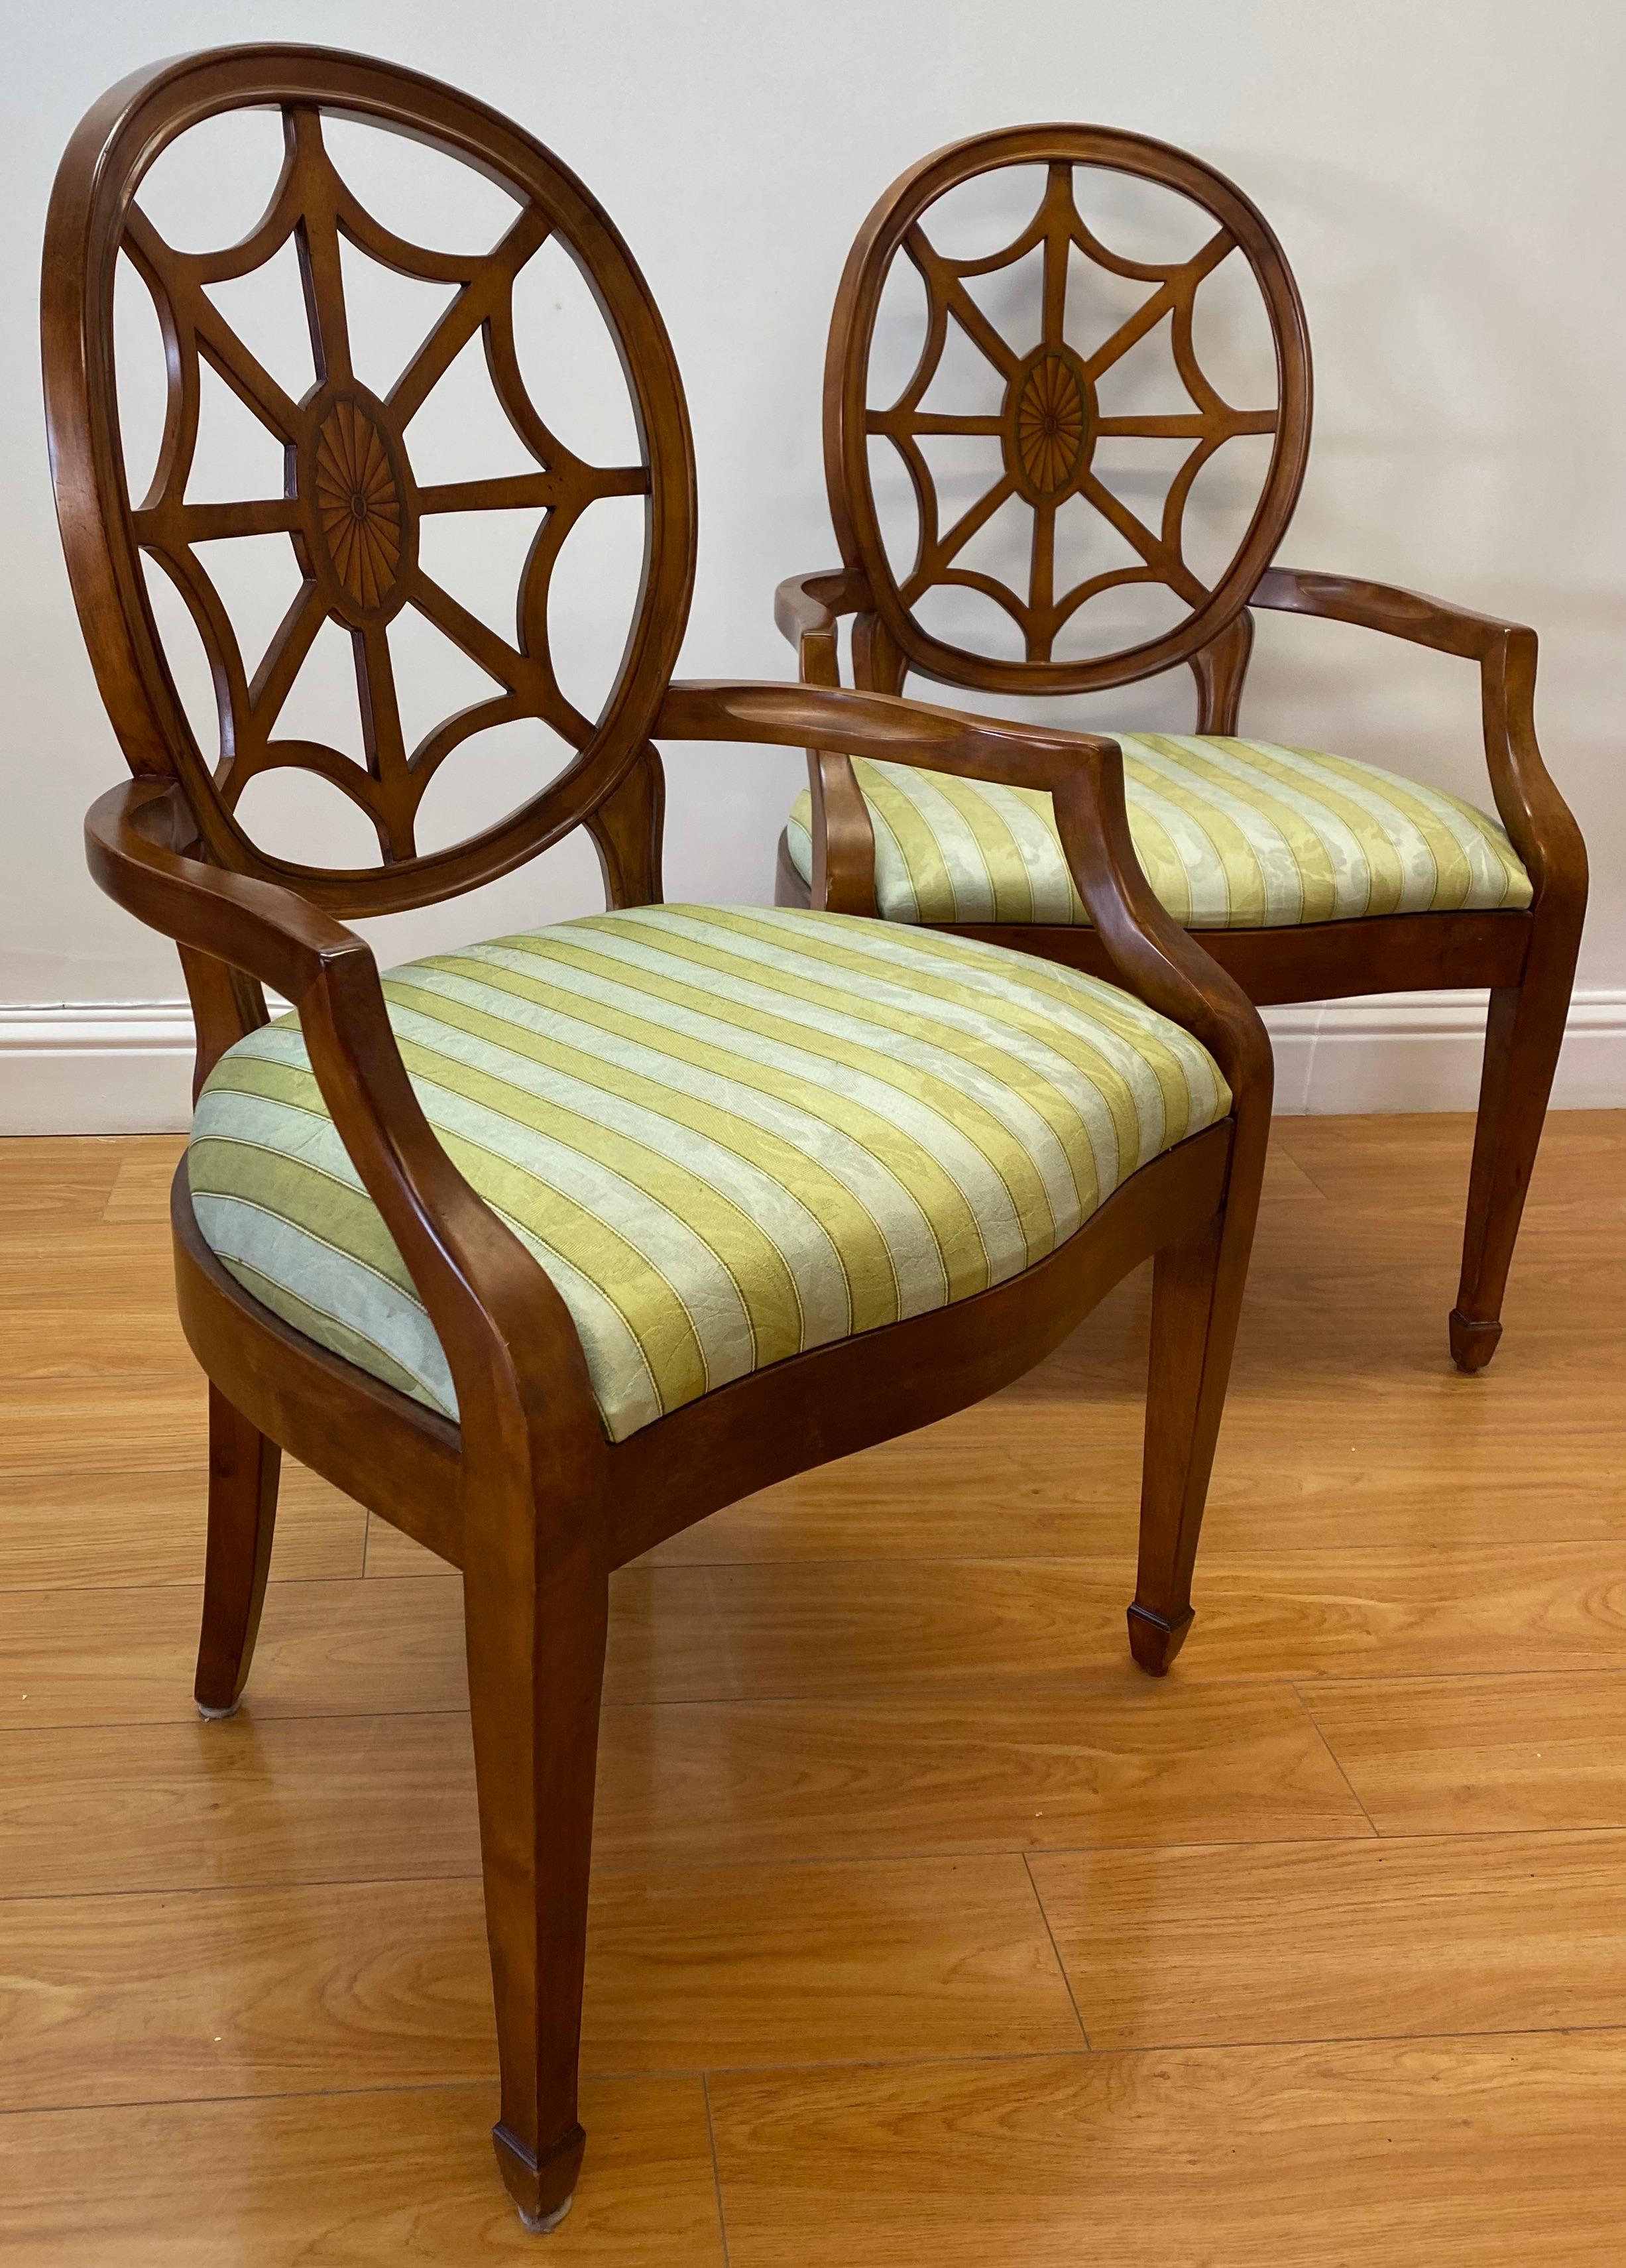 Pair of contemporary walnut framed upholstered armchairs with inlay

Measures: 24